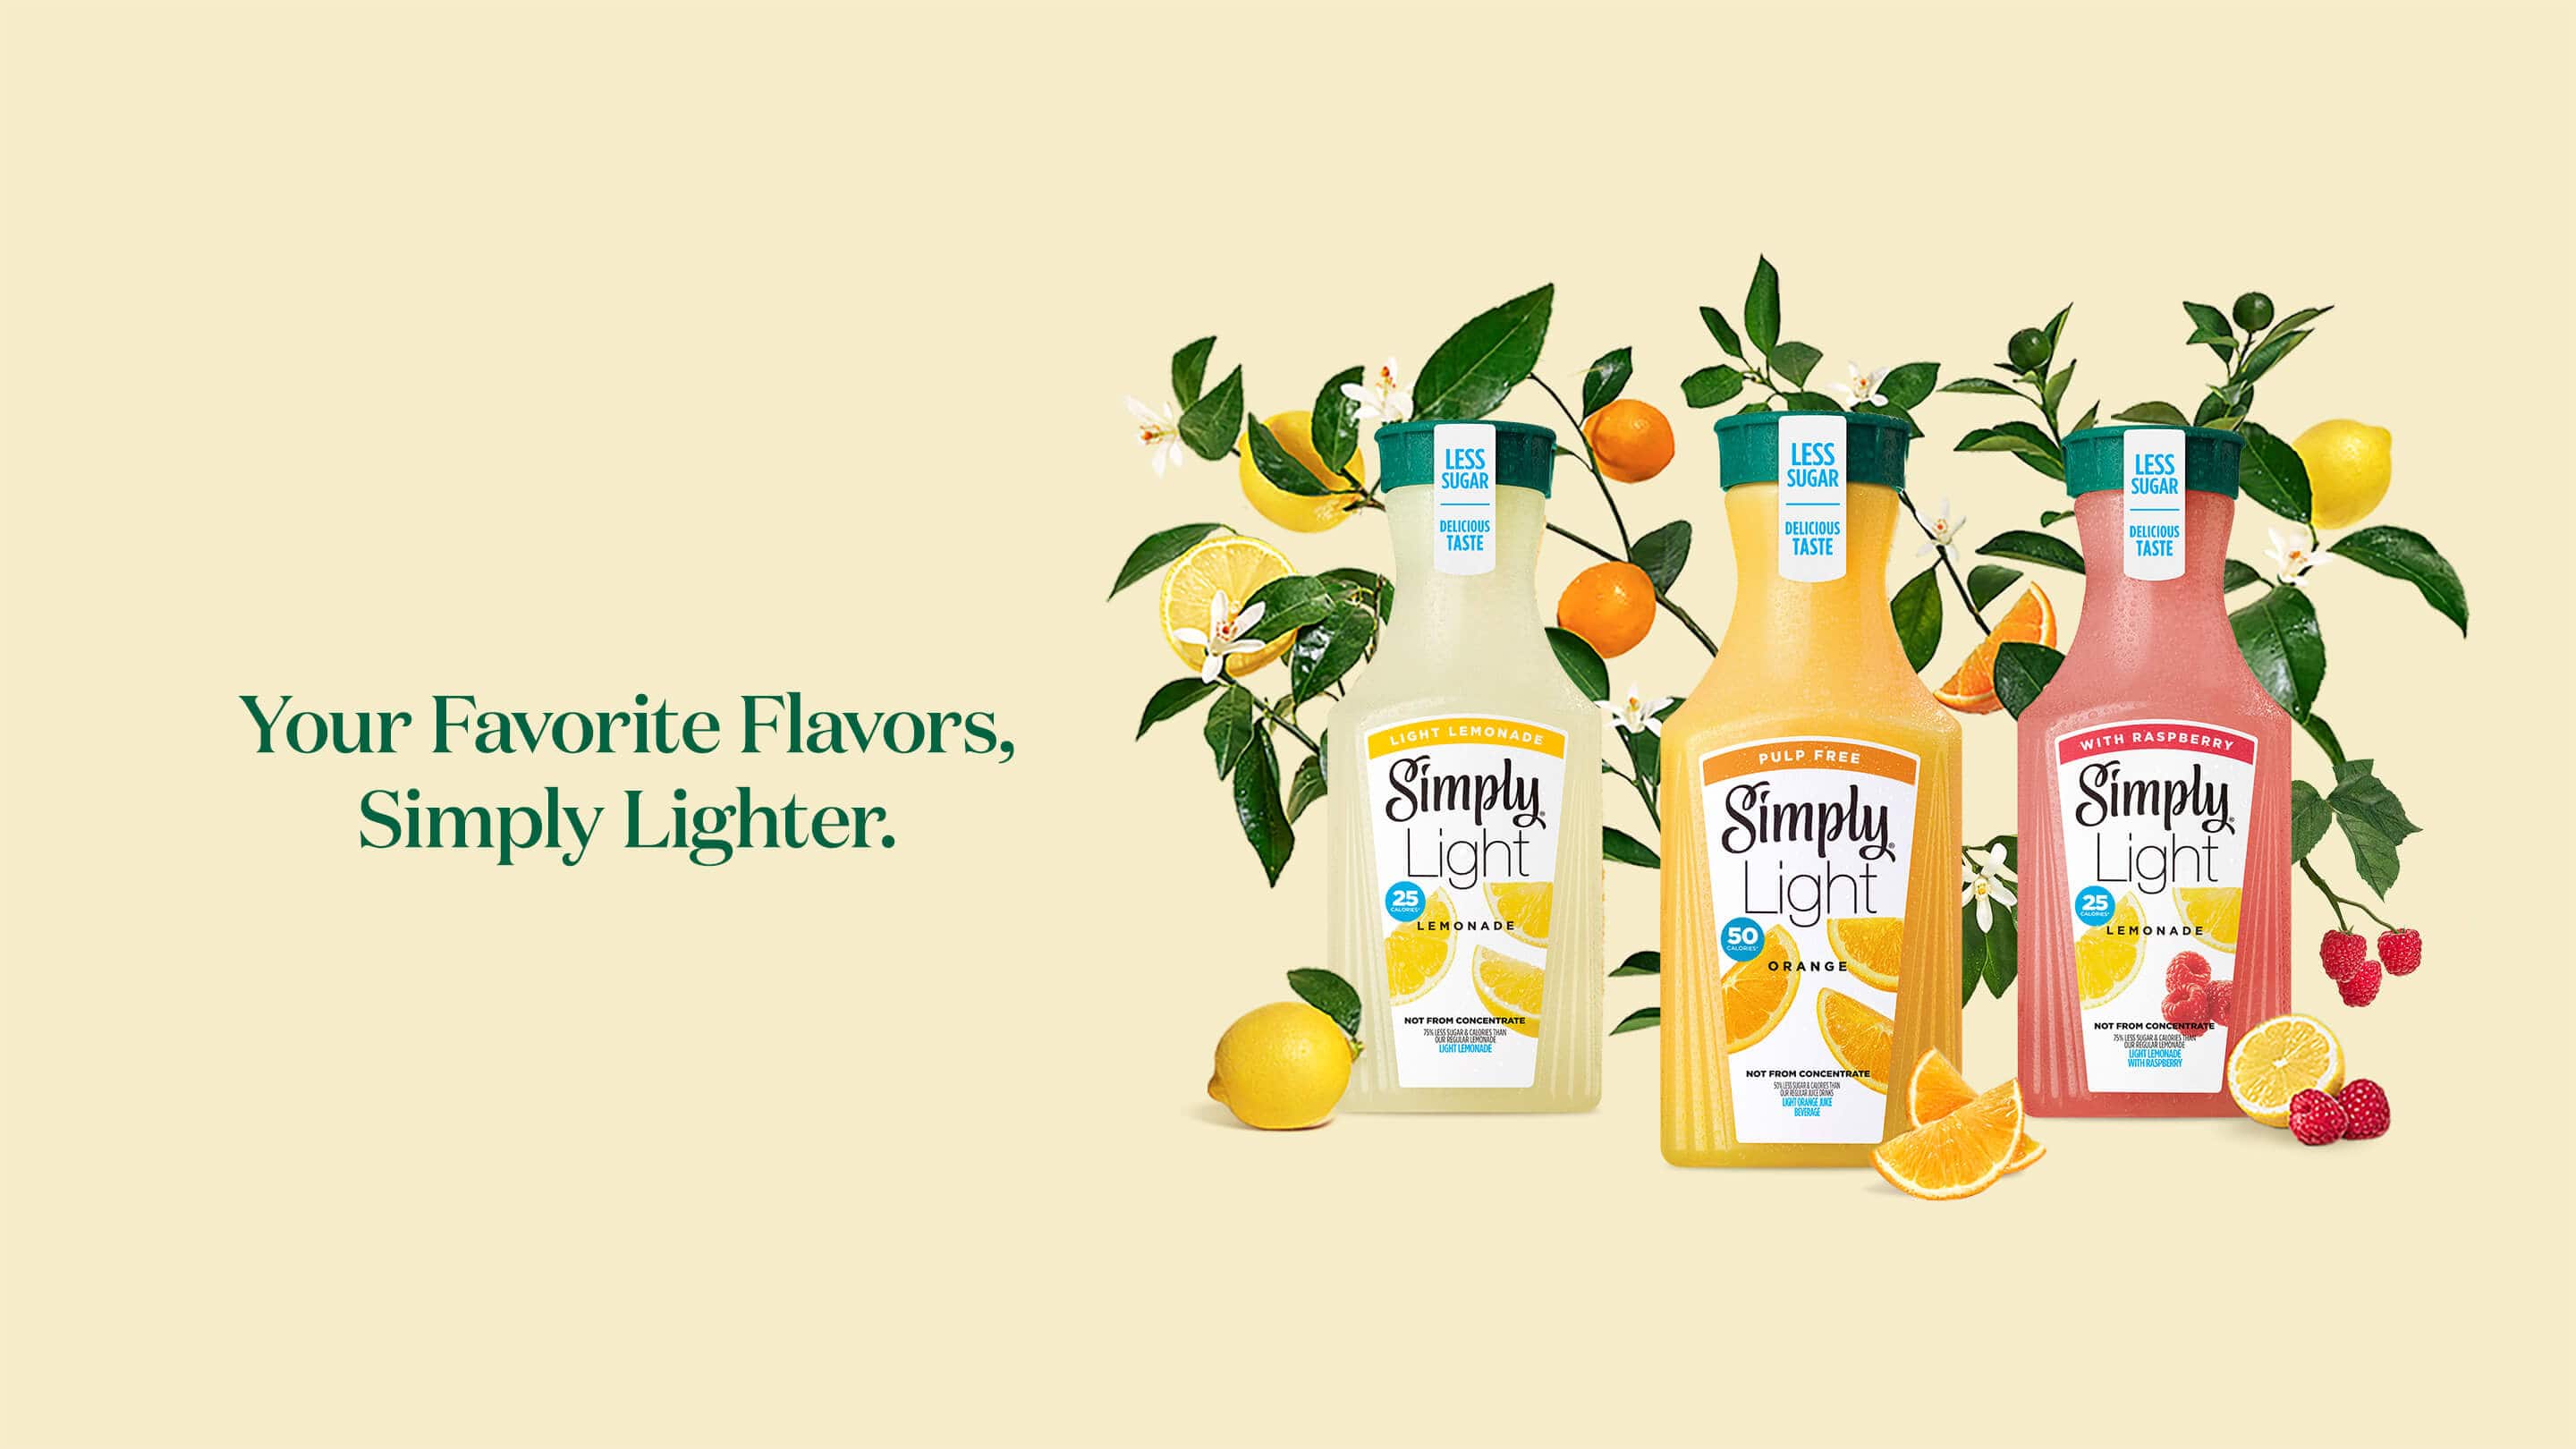 Your favorite flavors, simply lighter.